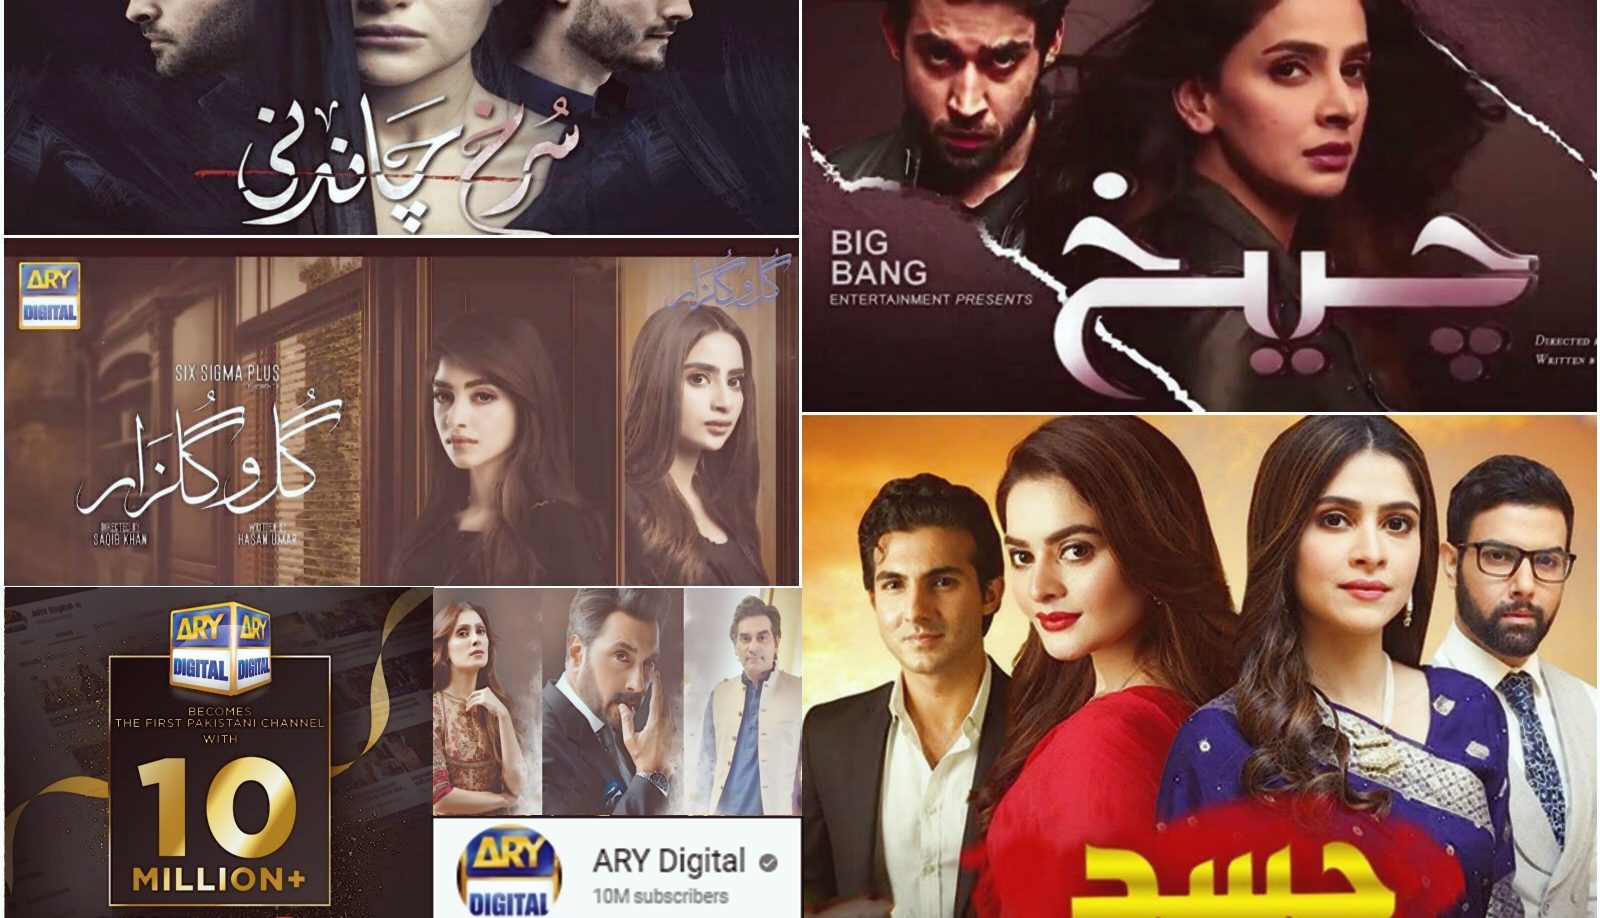 This is why ARY Digital has the largest Youtube family in the country